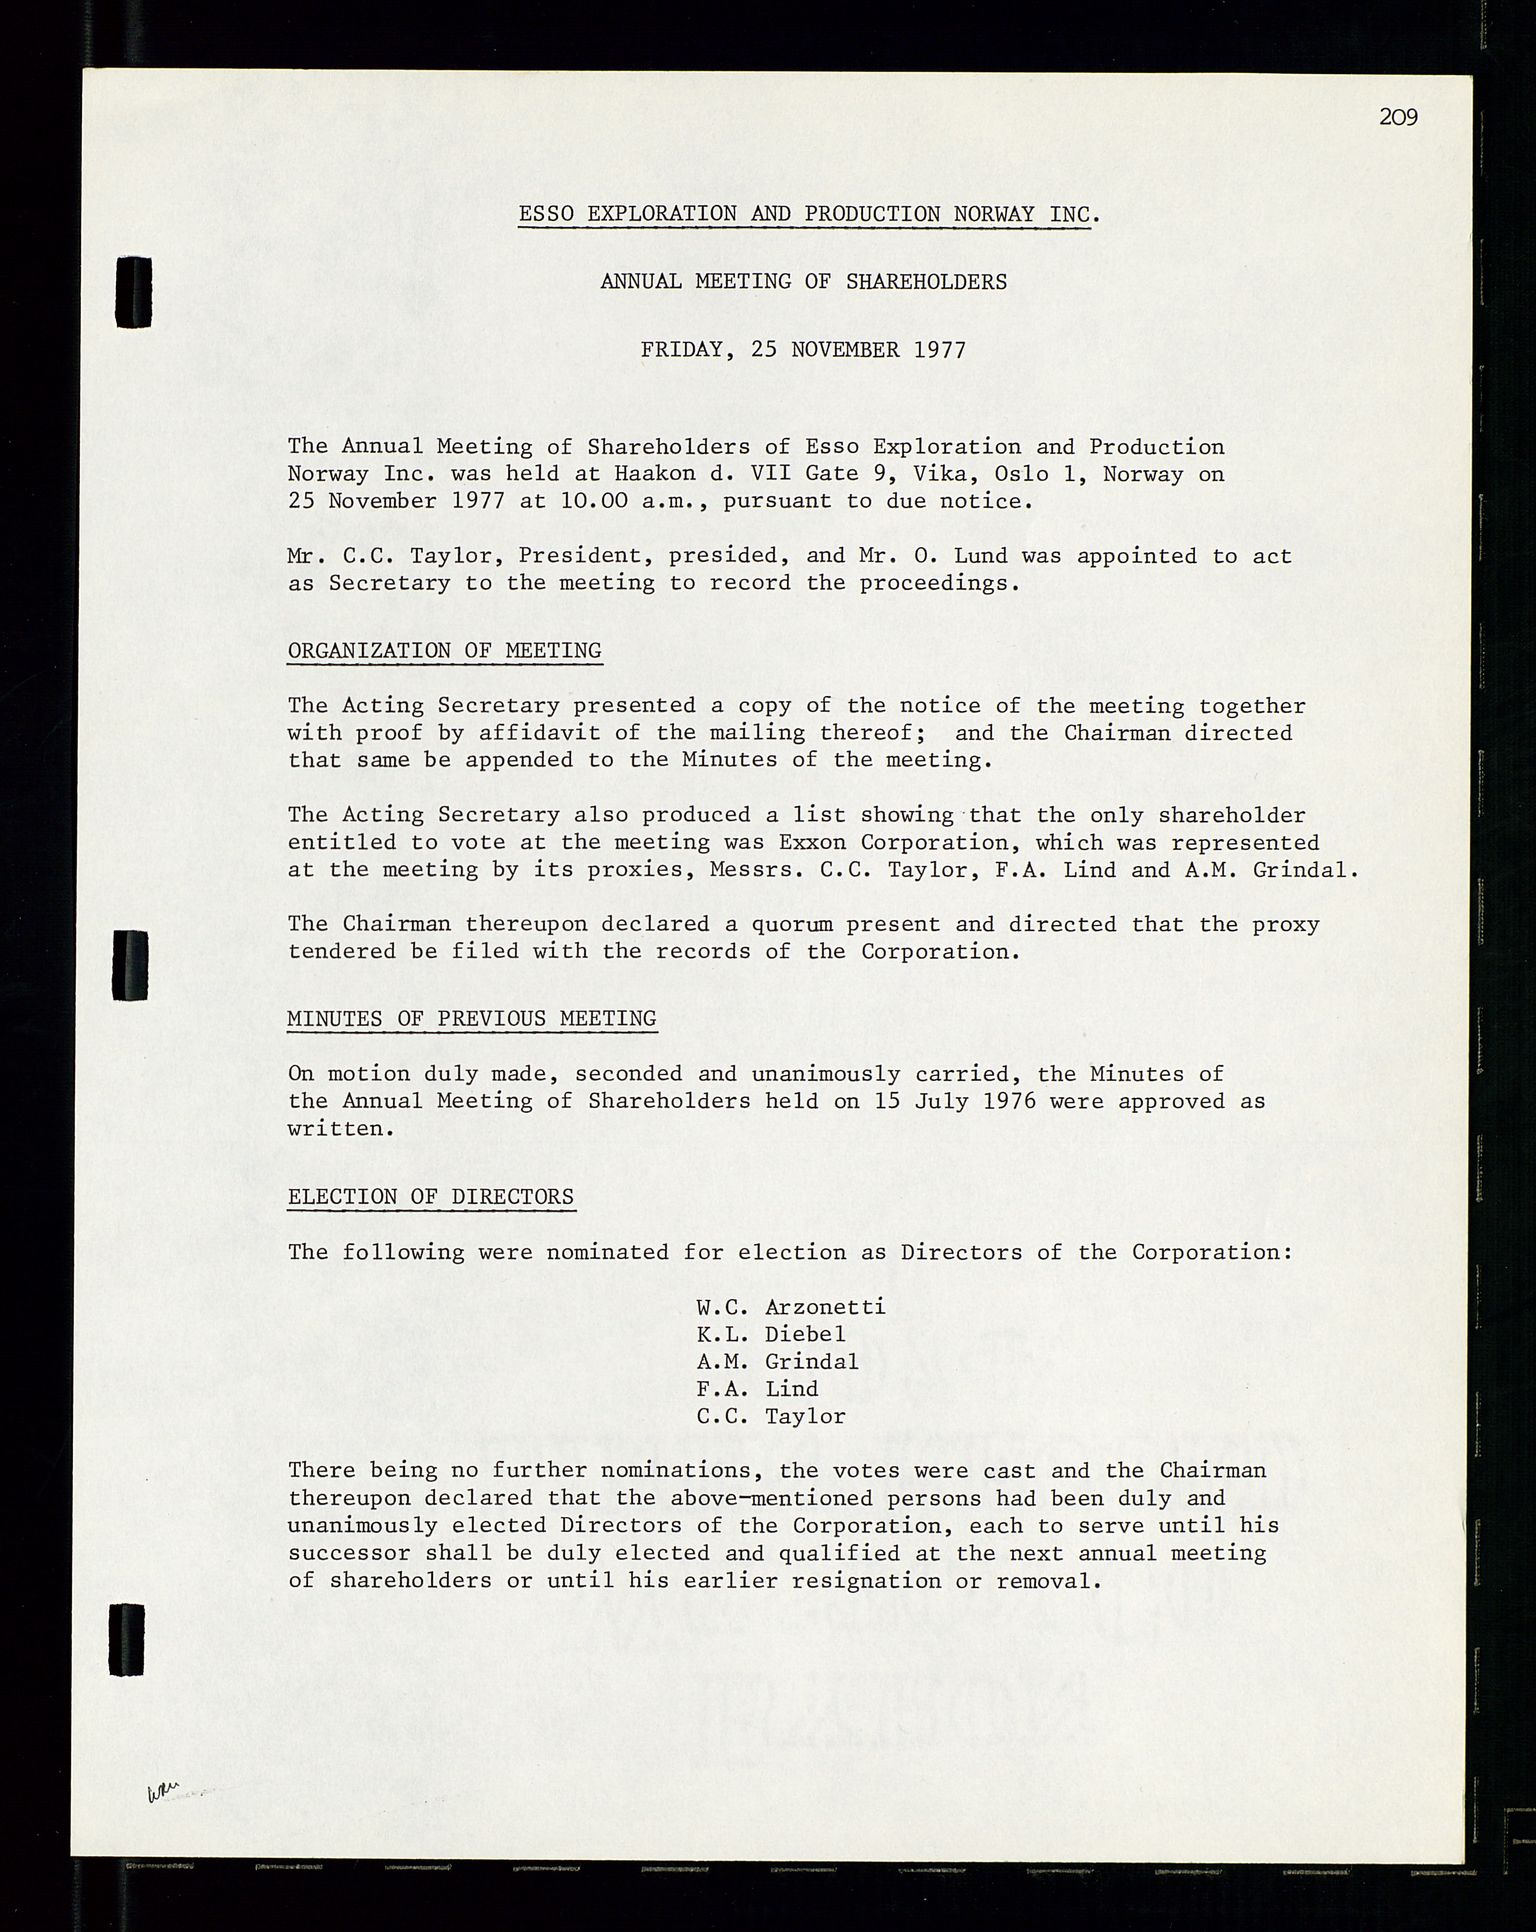 Pa 1512 - Esso Exploration and Production Norway Inc., SAST/A-101917/A/Aa/L0001/0002: Styredokumenter / Corporate records, Board meeting minutes, Agreements, Stocholder meetings, 1975-1979, p. 64